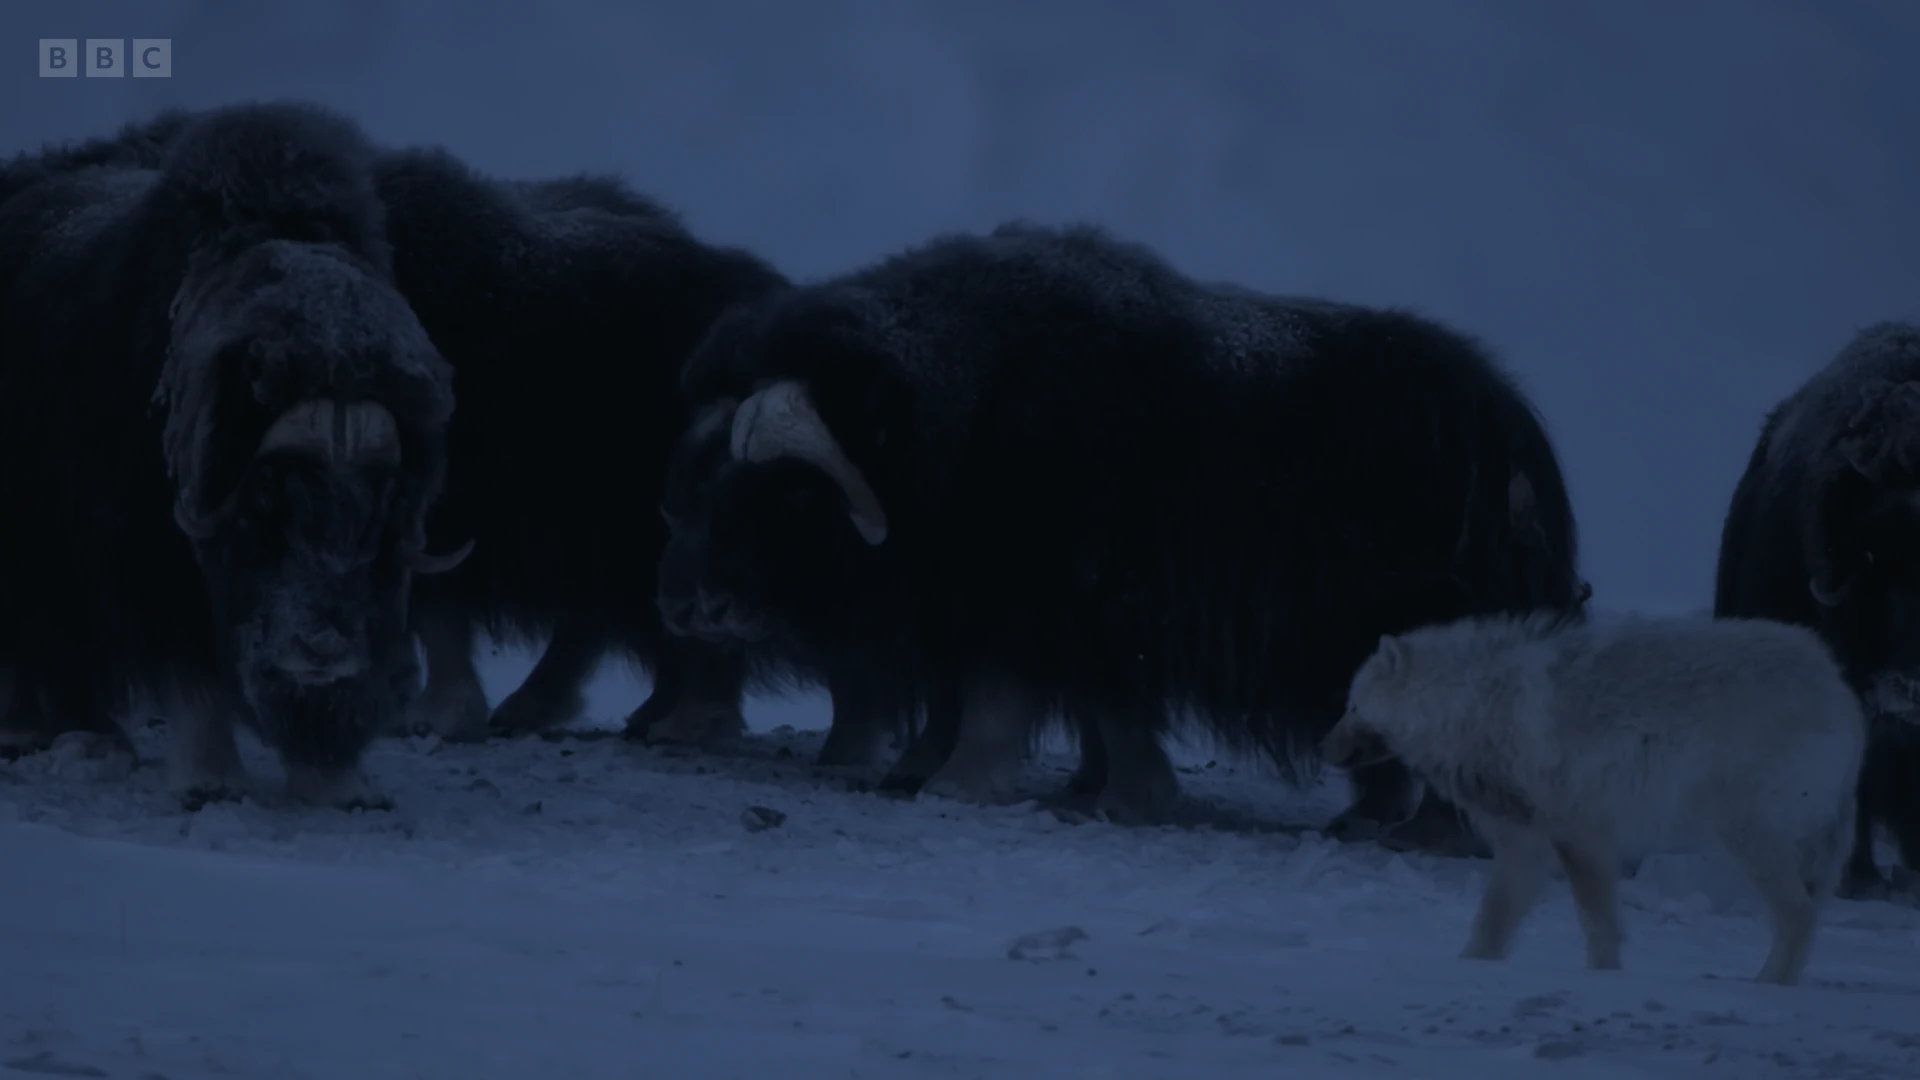 Muskox (Ovibos moschatus) as shown in A Perfect Planet - The Sun